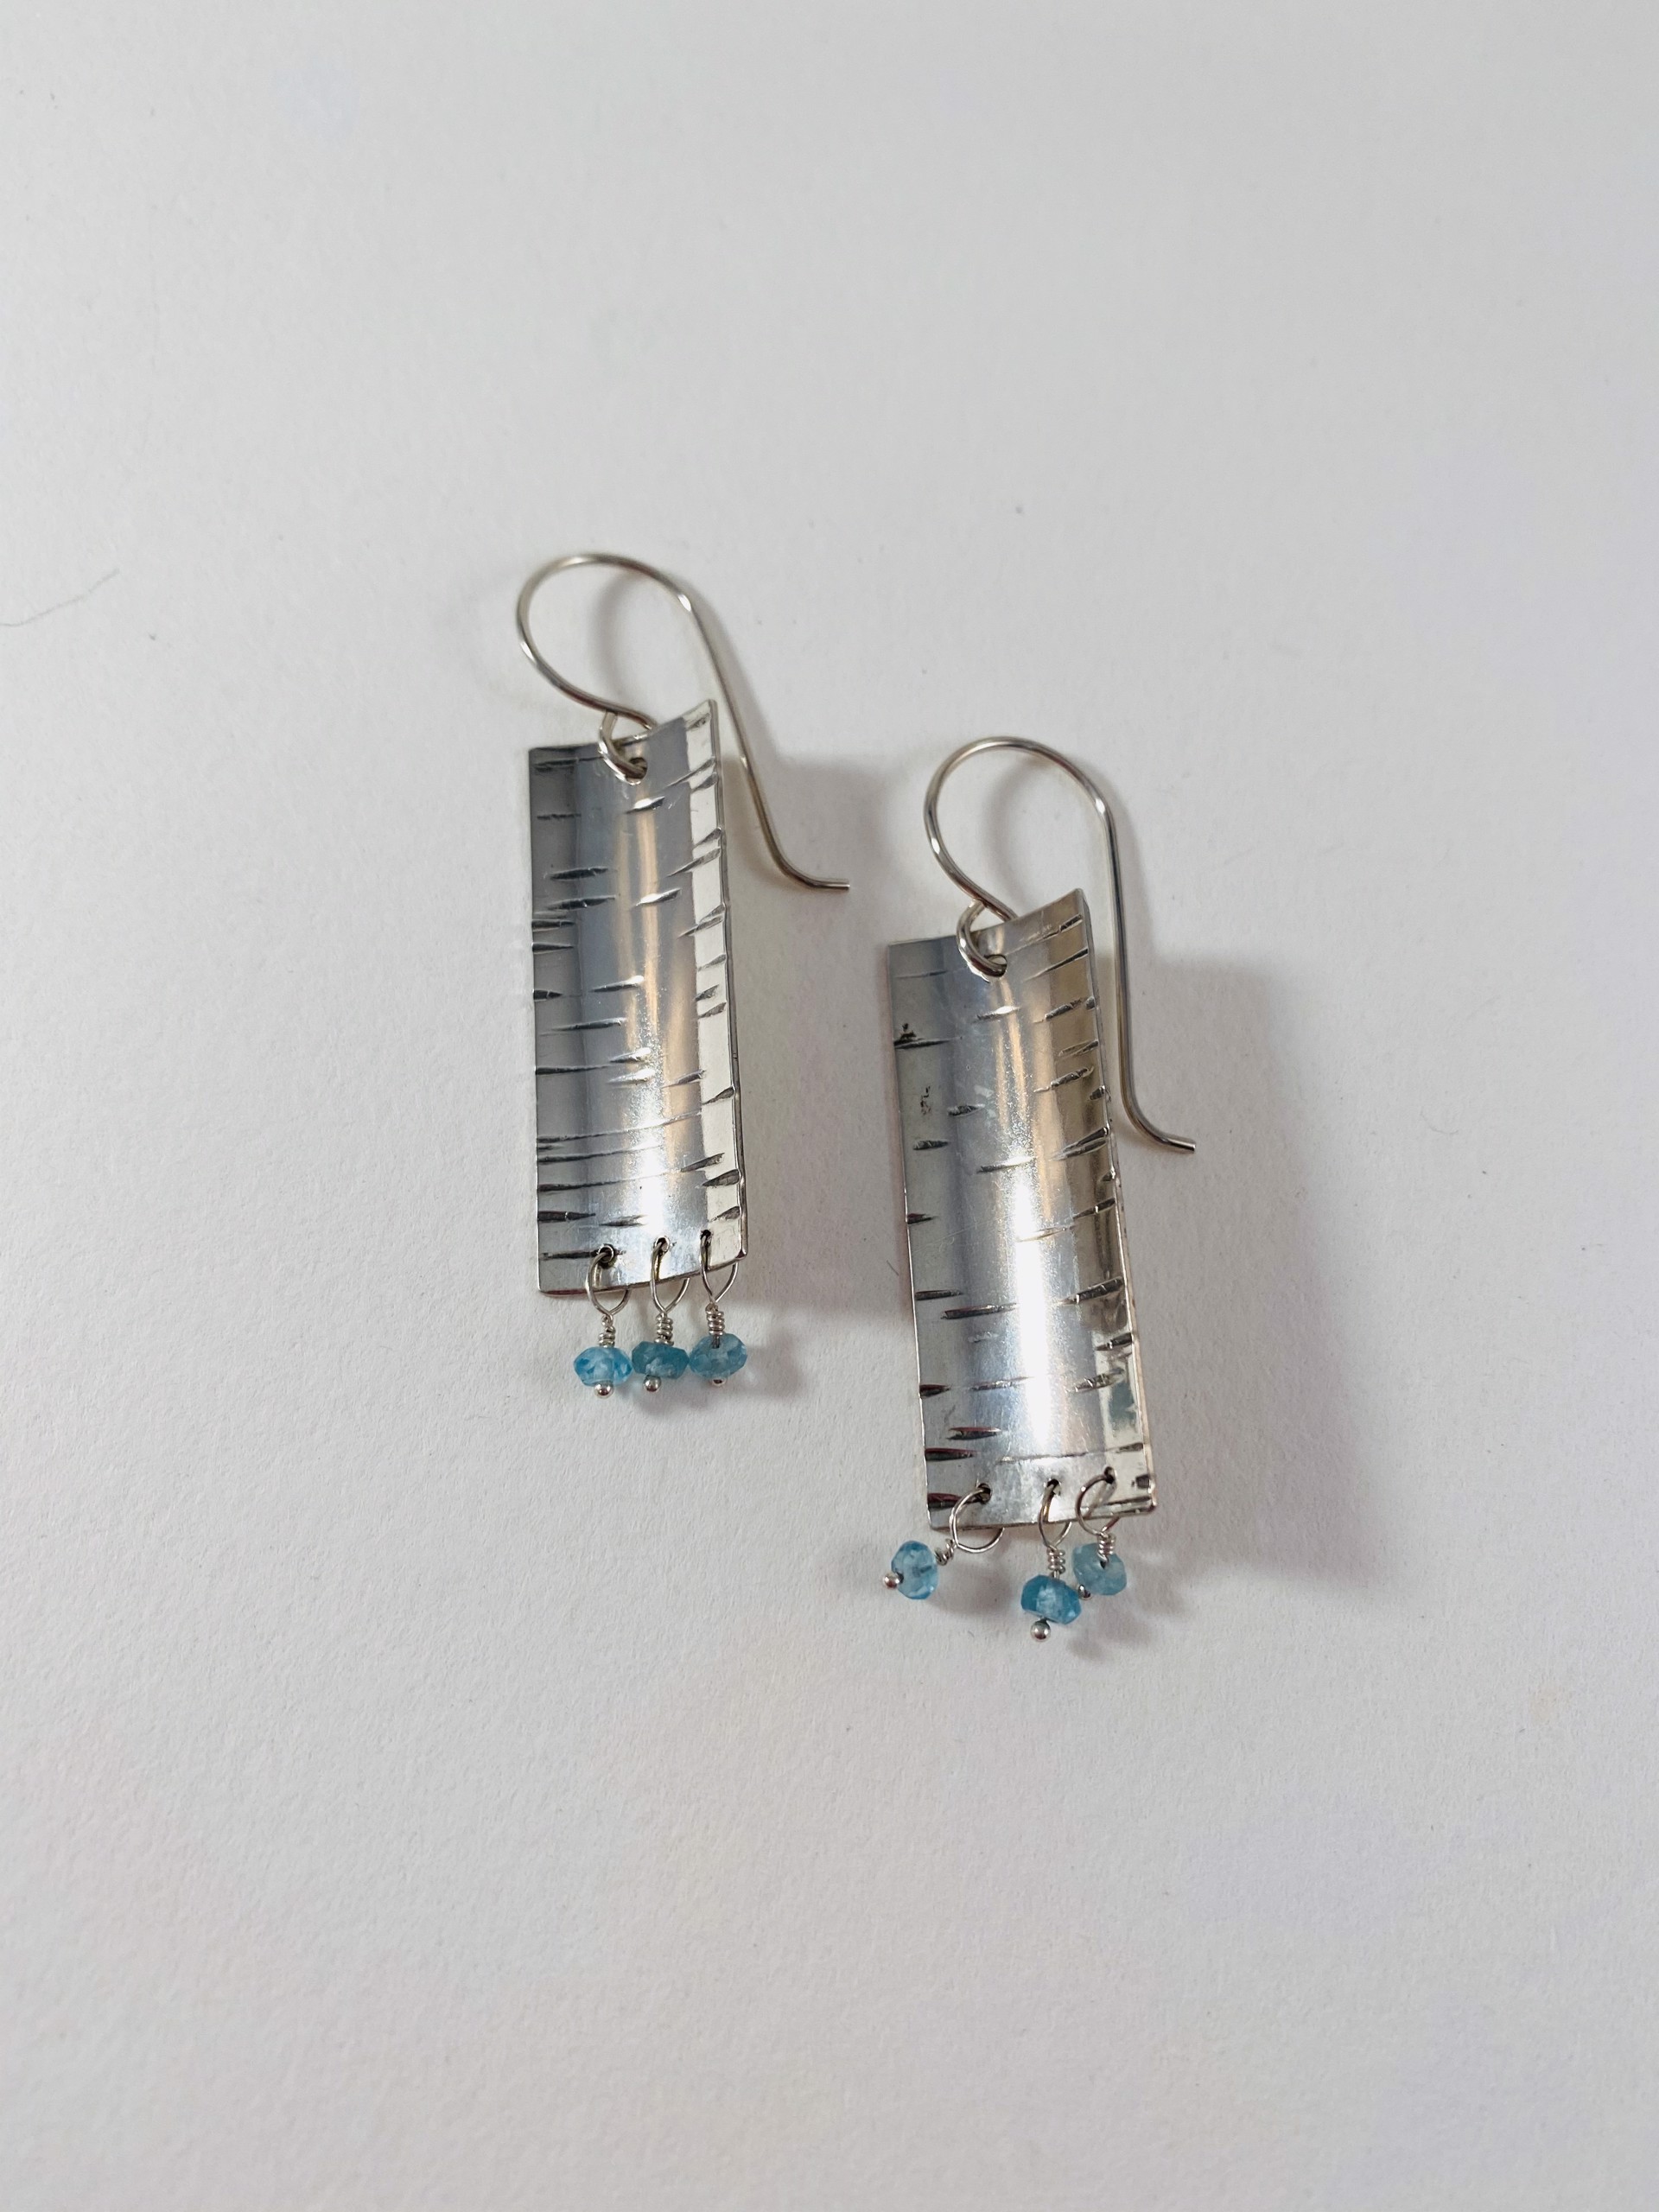 Silver and Apatite Birch Earrings by Shelby Lee - jewelry